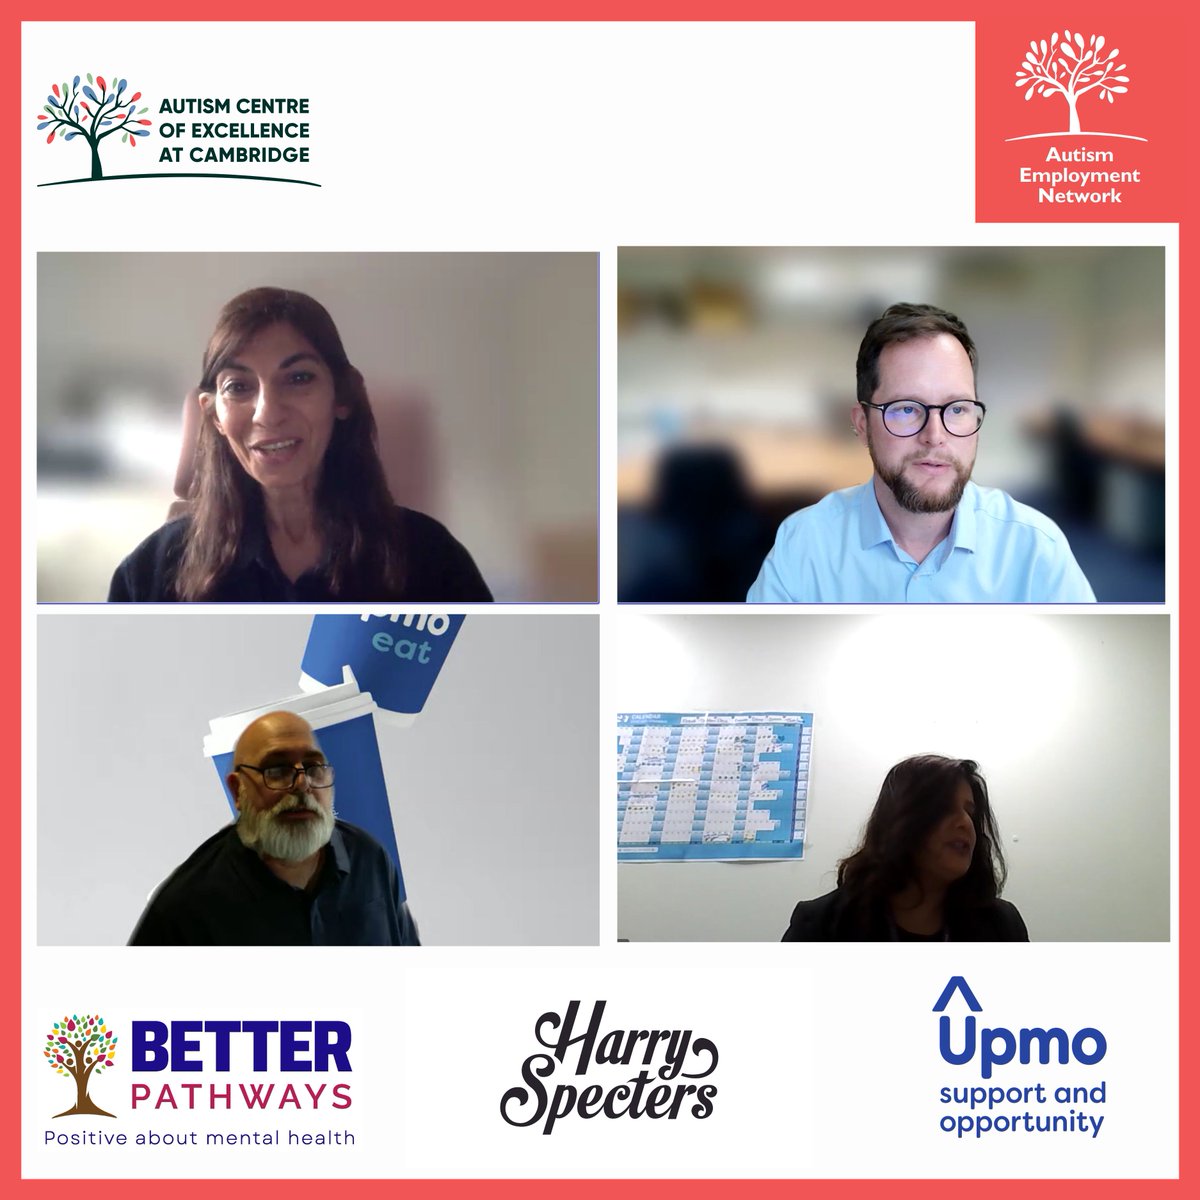 65 people from organisations across the UK joined our Autism Employment Network launch event. Big thanks to our inspiring guest speakers from @upmoproject @HarrySpecters @BetterPathways Find out more and join the network: bit.ly/3QP6iCZ #autism #employment #network